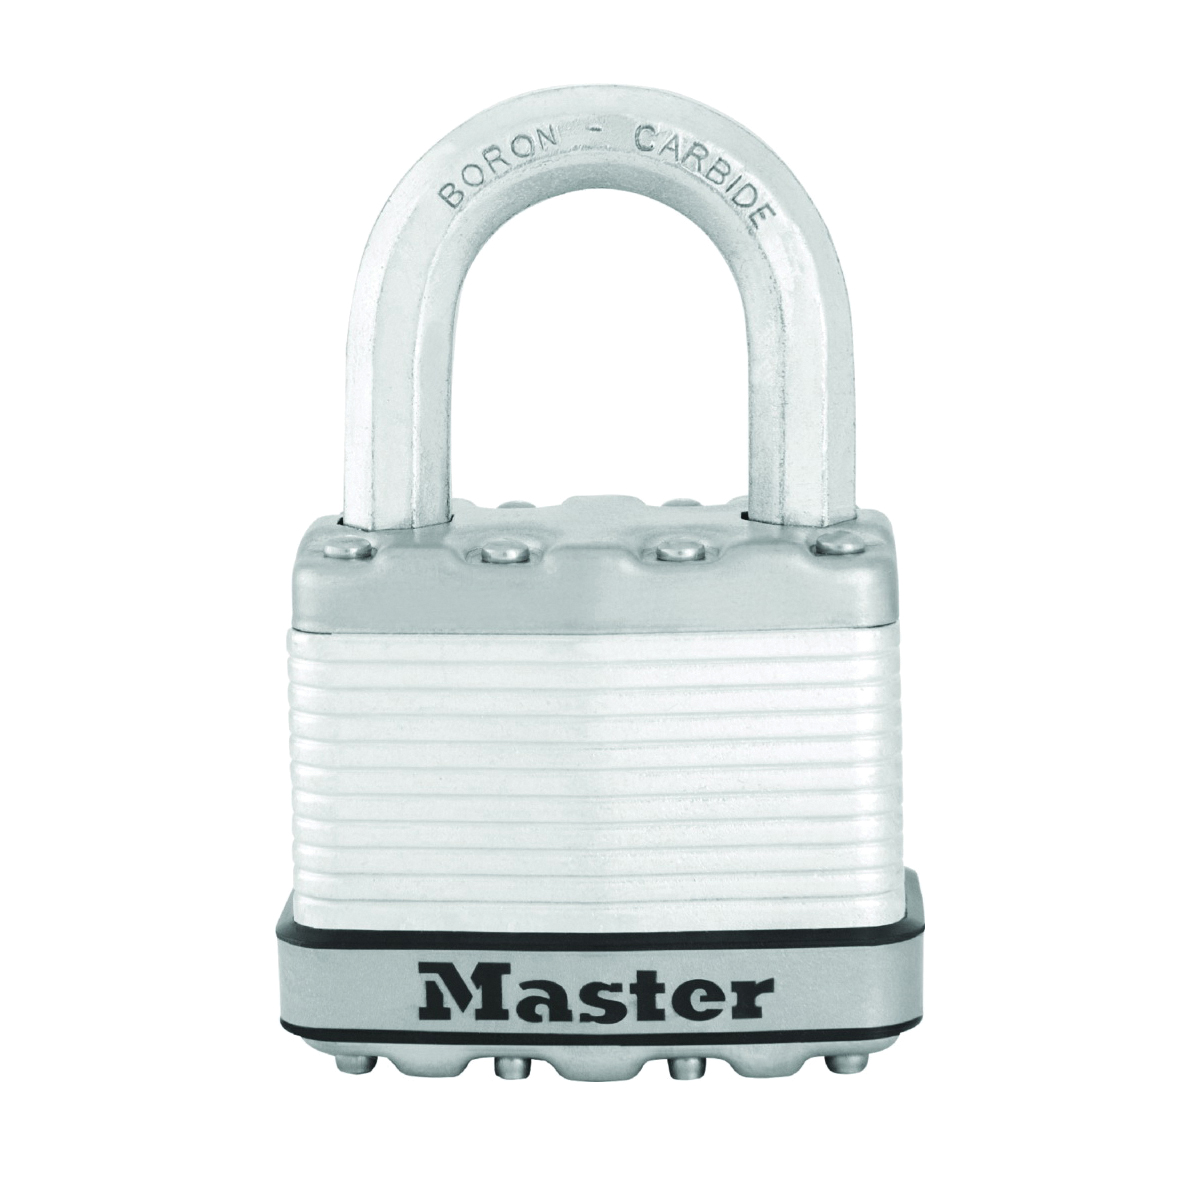 Magnum Series M5XKAD Padlock, Keyed Different Key, 3/8 in Dia Shackle, 1 in H Shackle, Boron Carbide Shackle